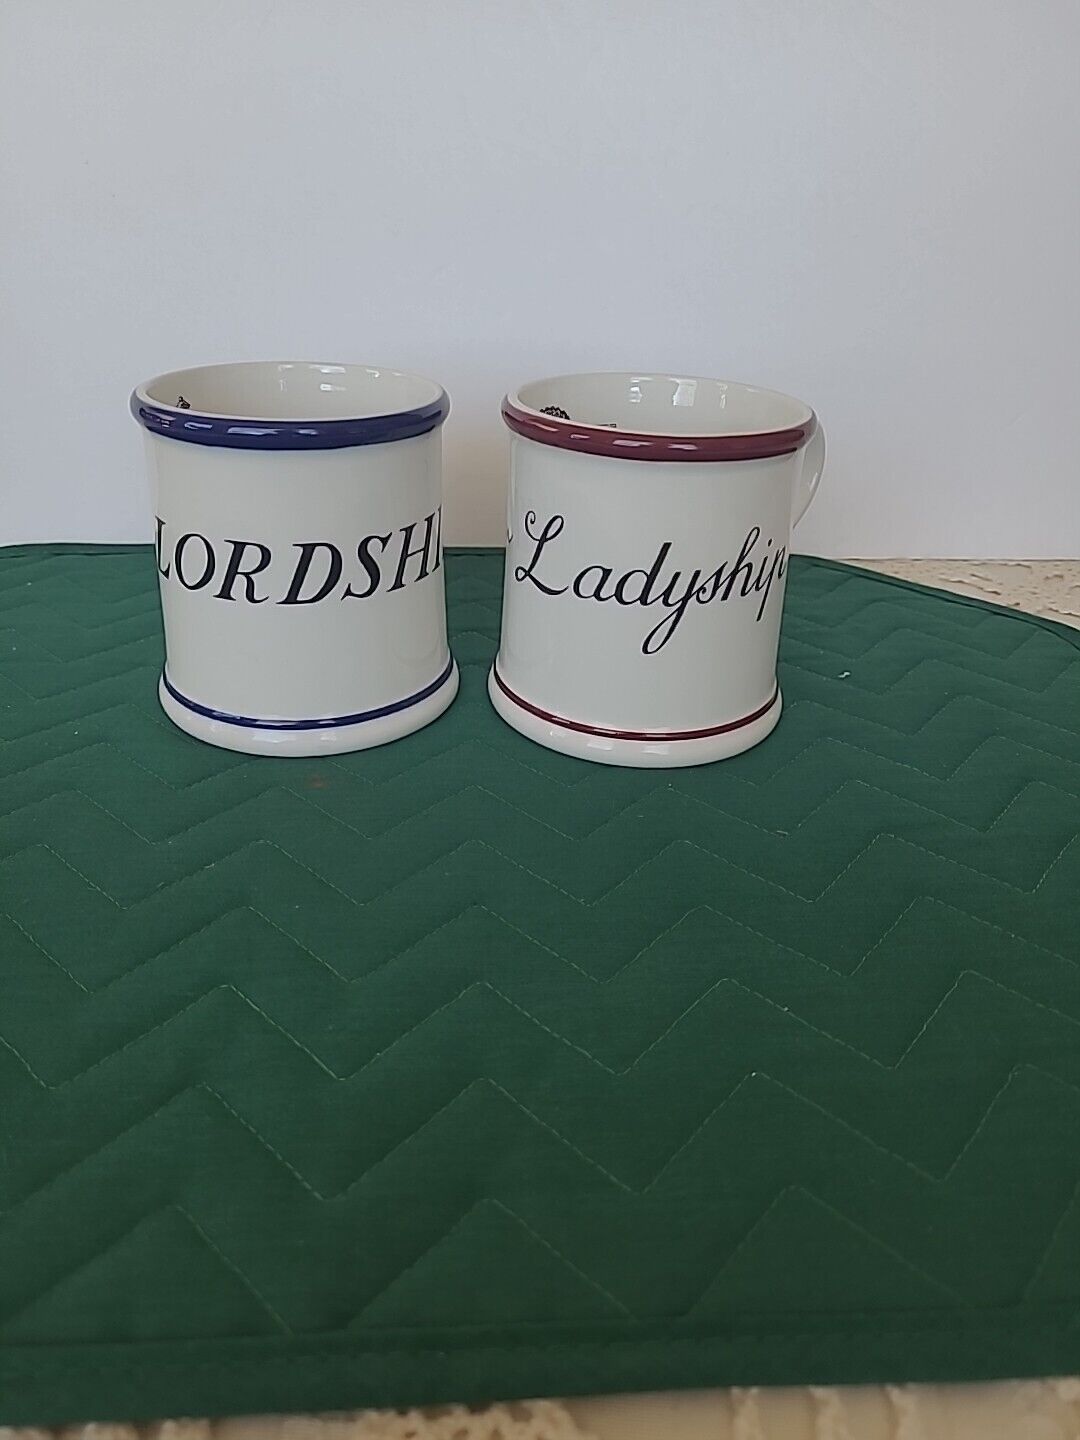 His Lordship Her Ladyship Mugs The National Trust Staffordshire 10 Oz.